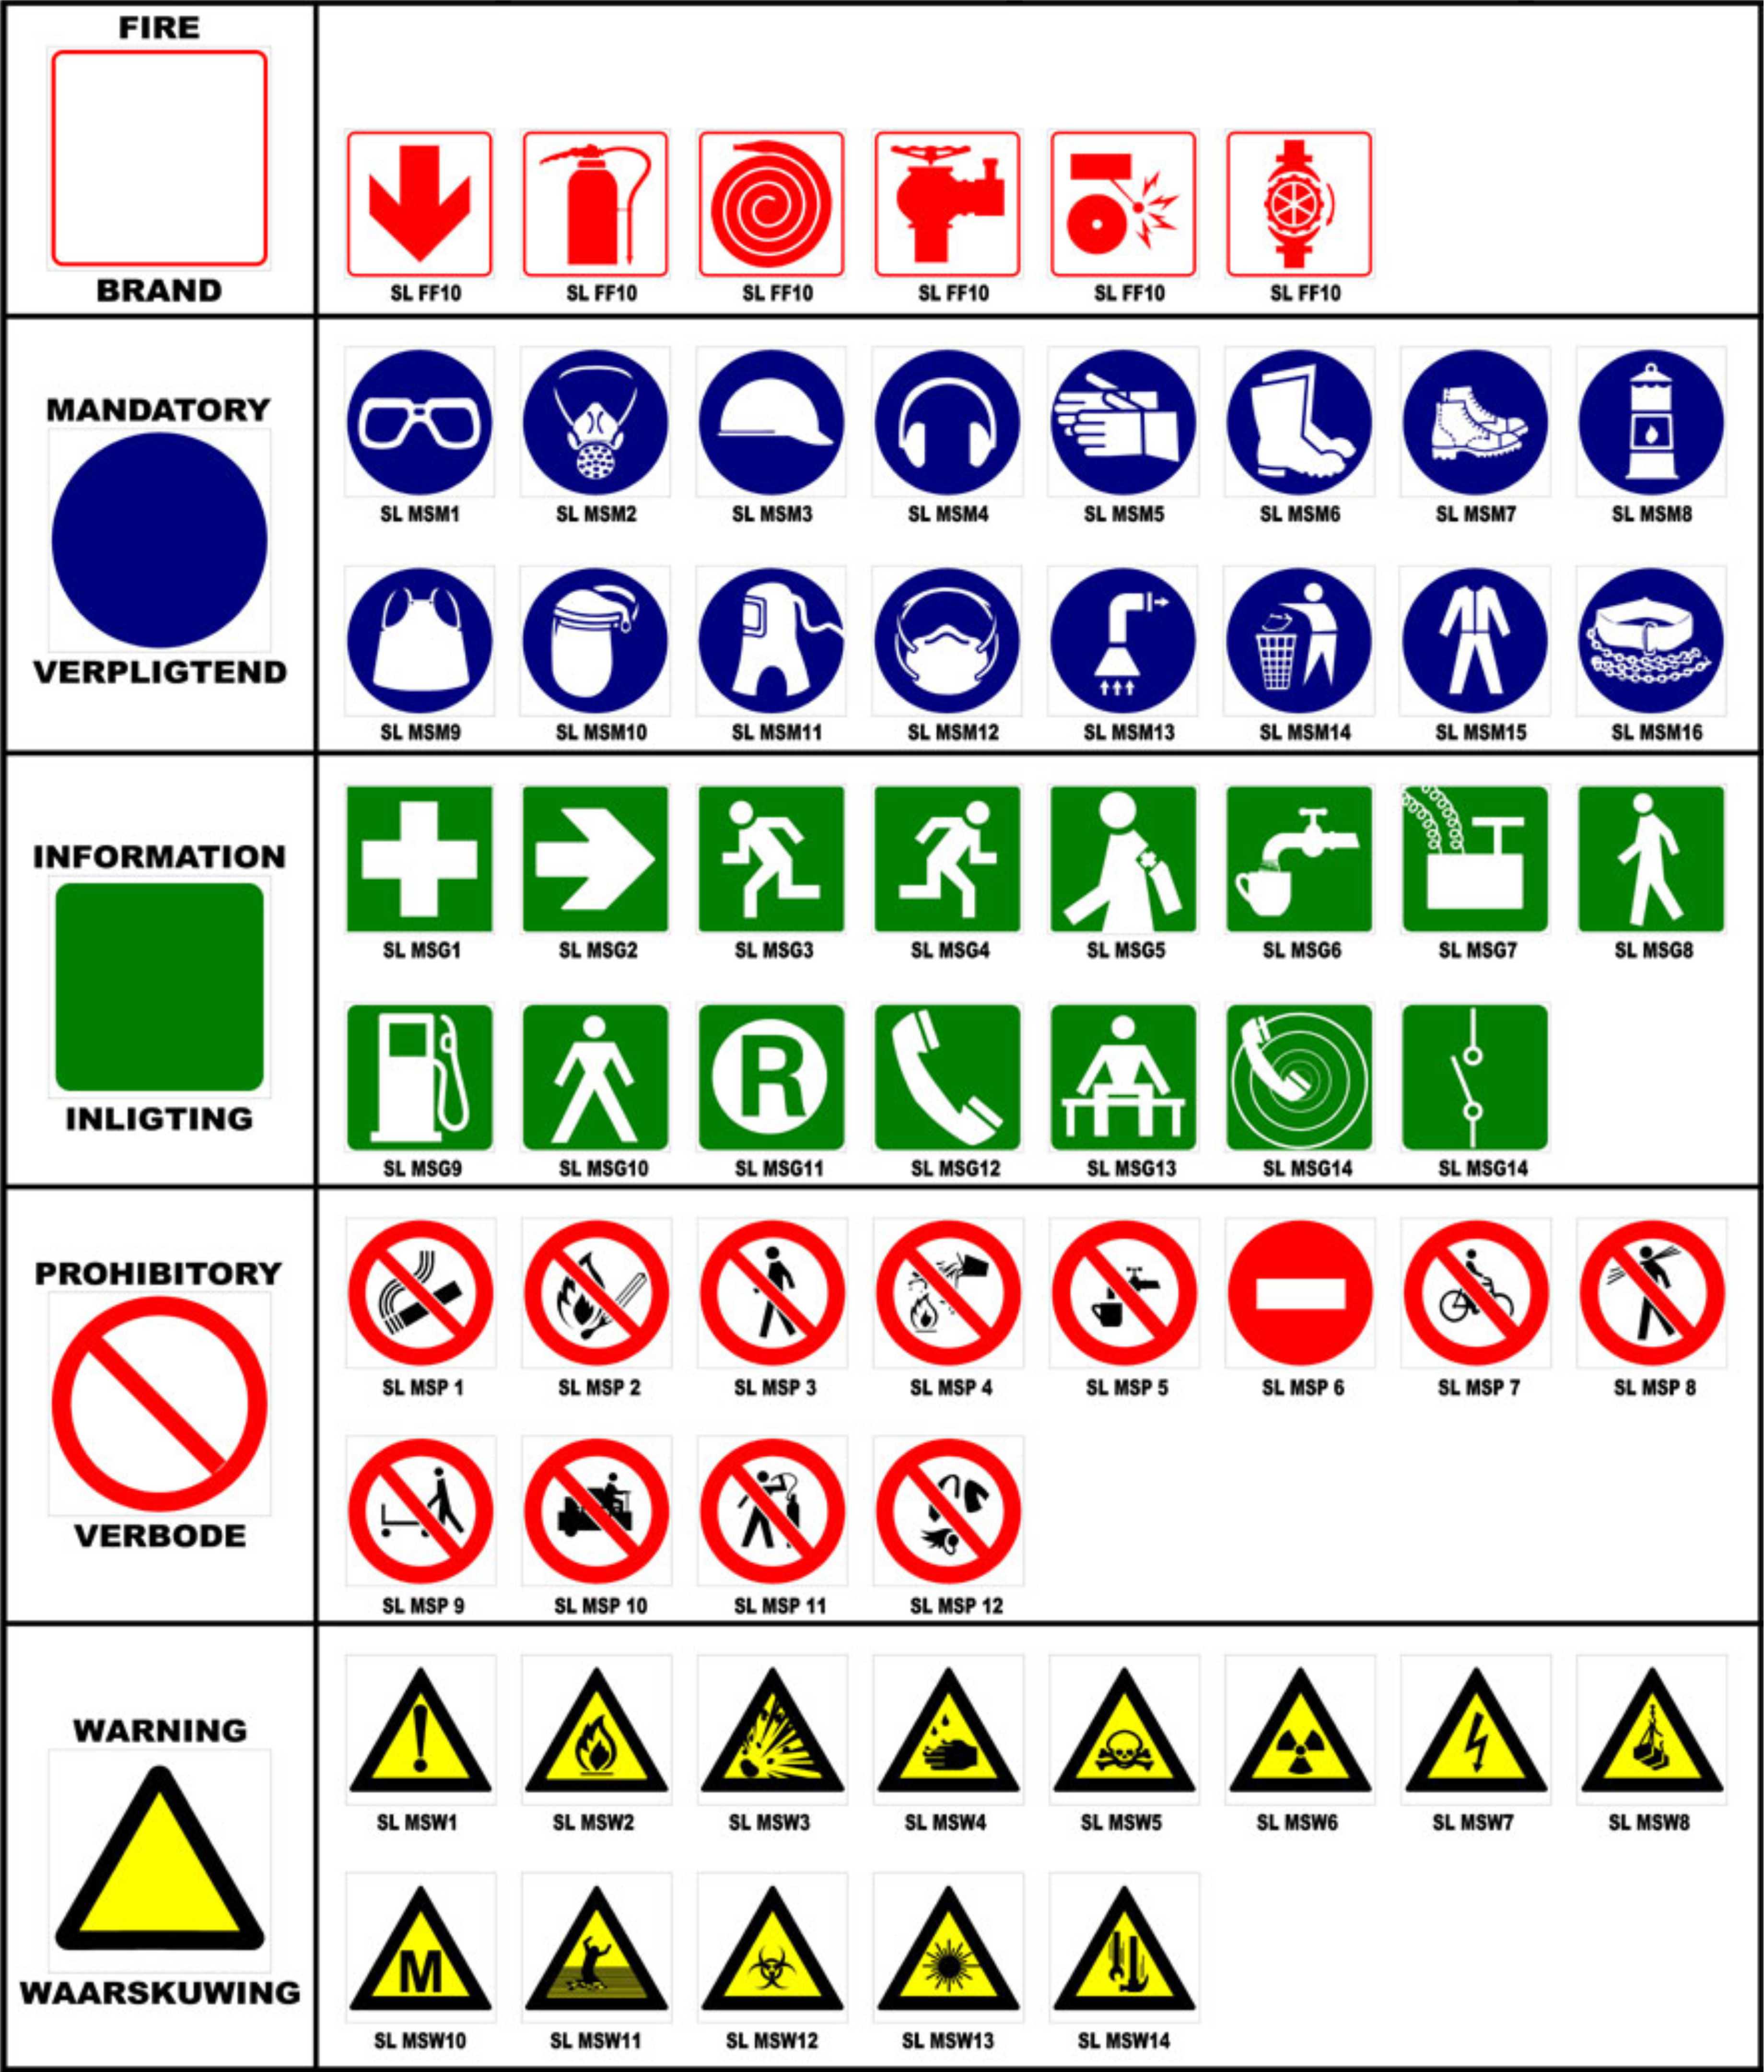 Symbolic Safety Signs And Meanings - Image to u